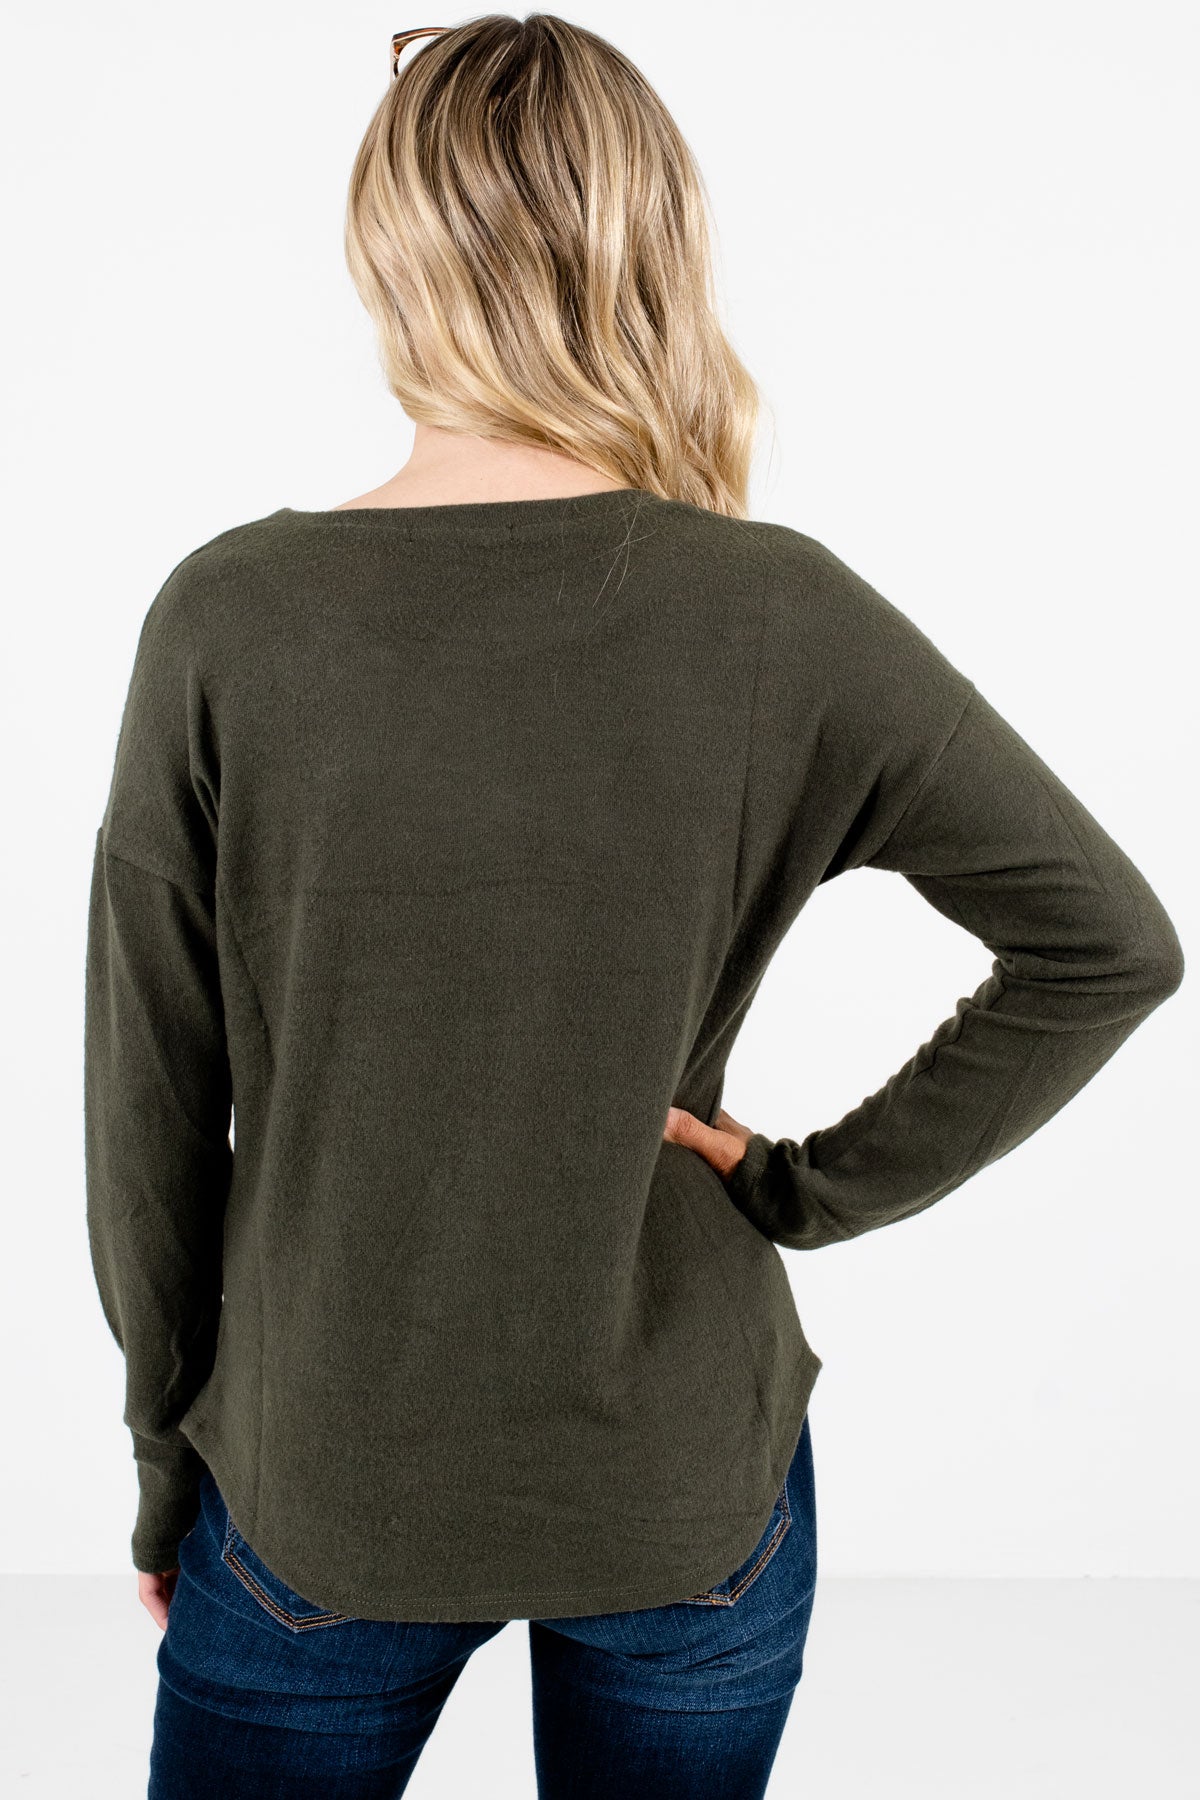 Women's Olive Green Soft High-Quality Material Boutique Tops